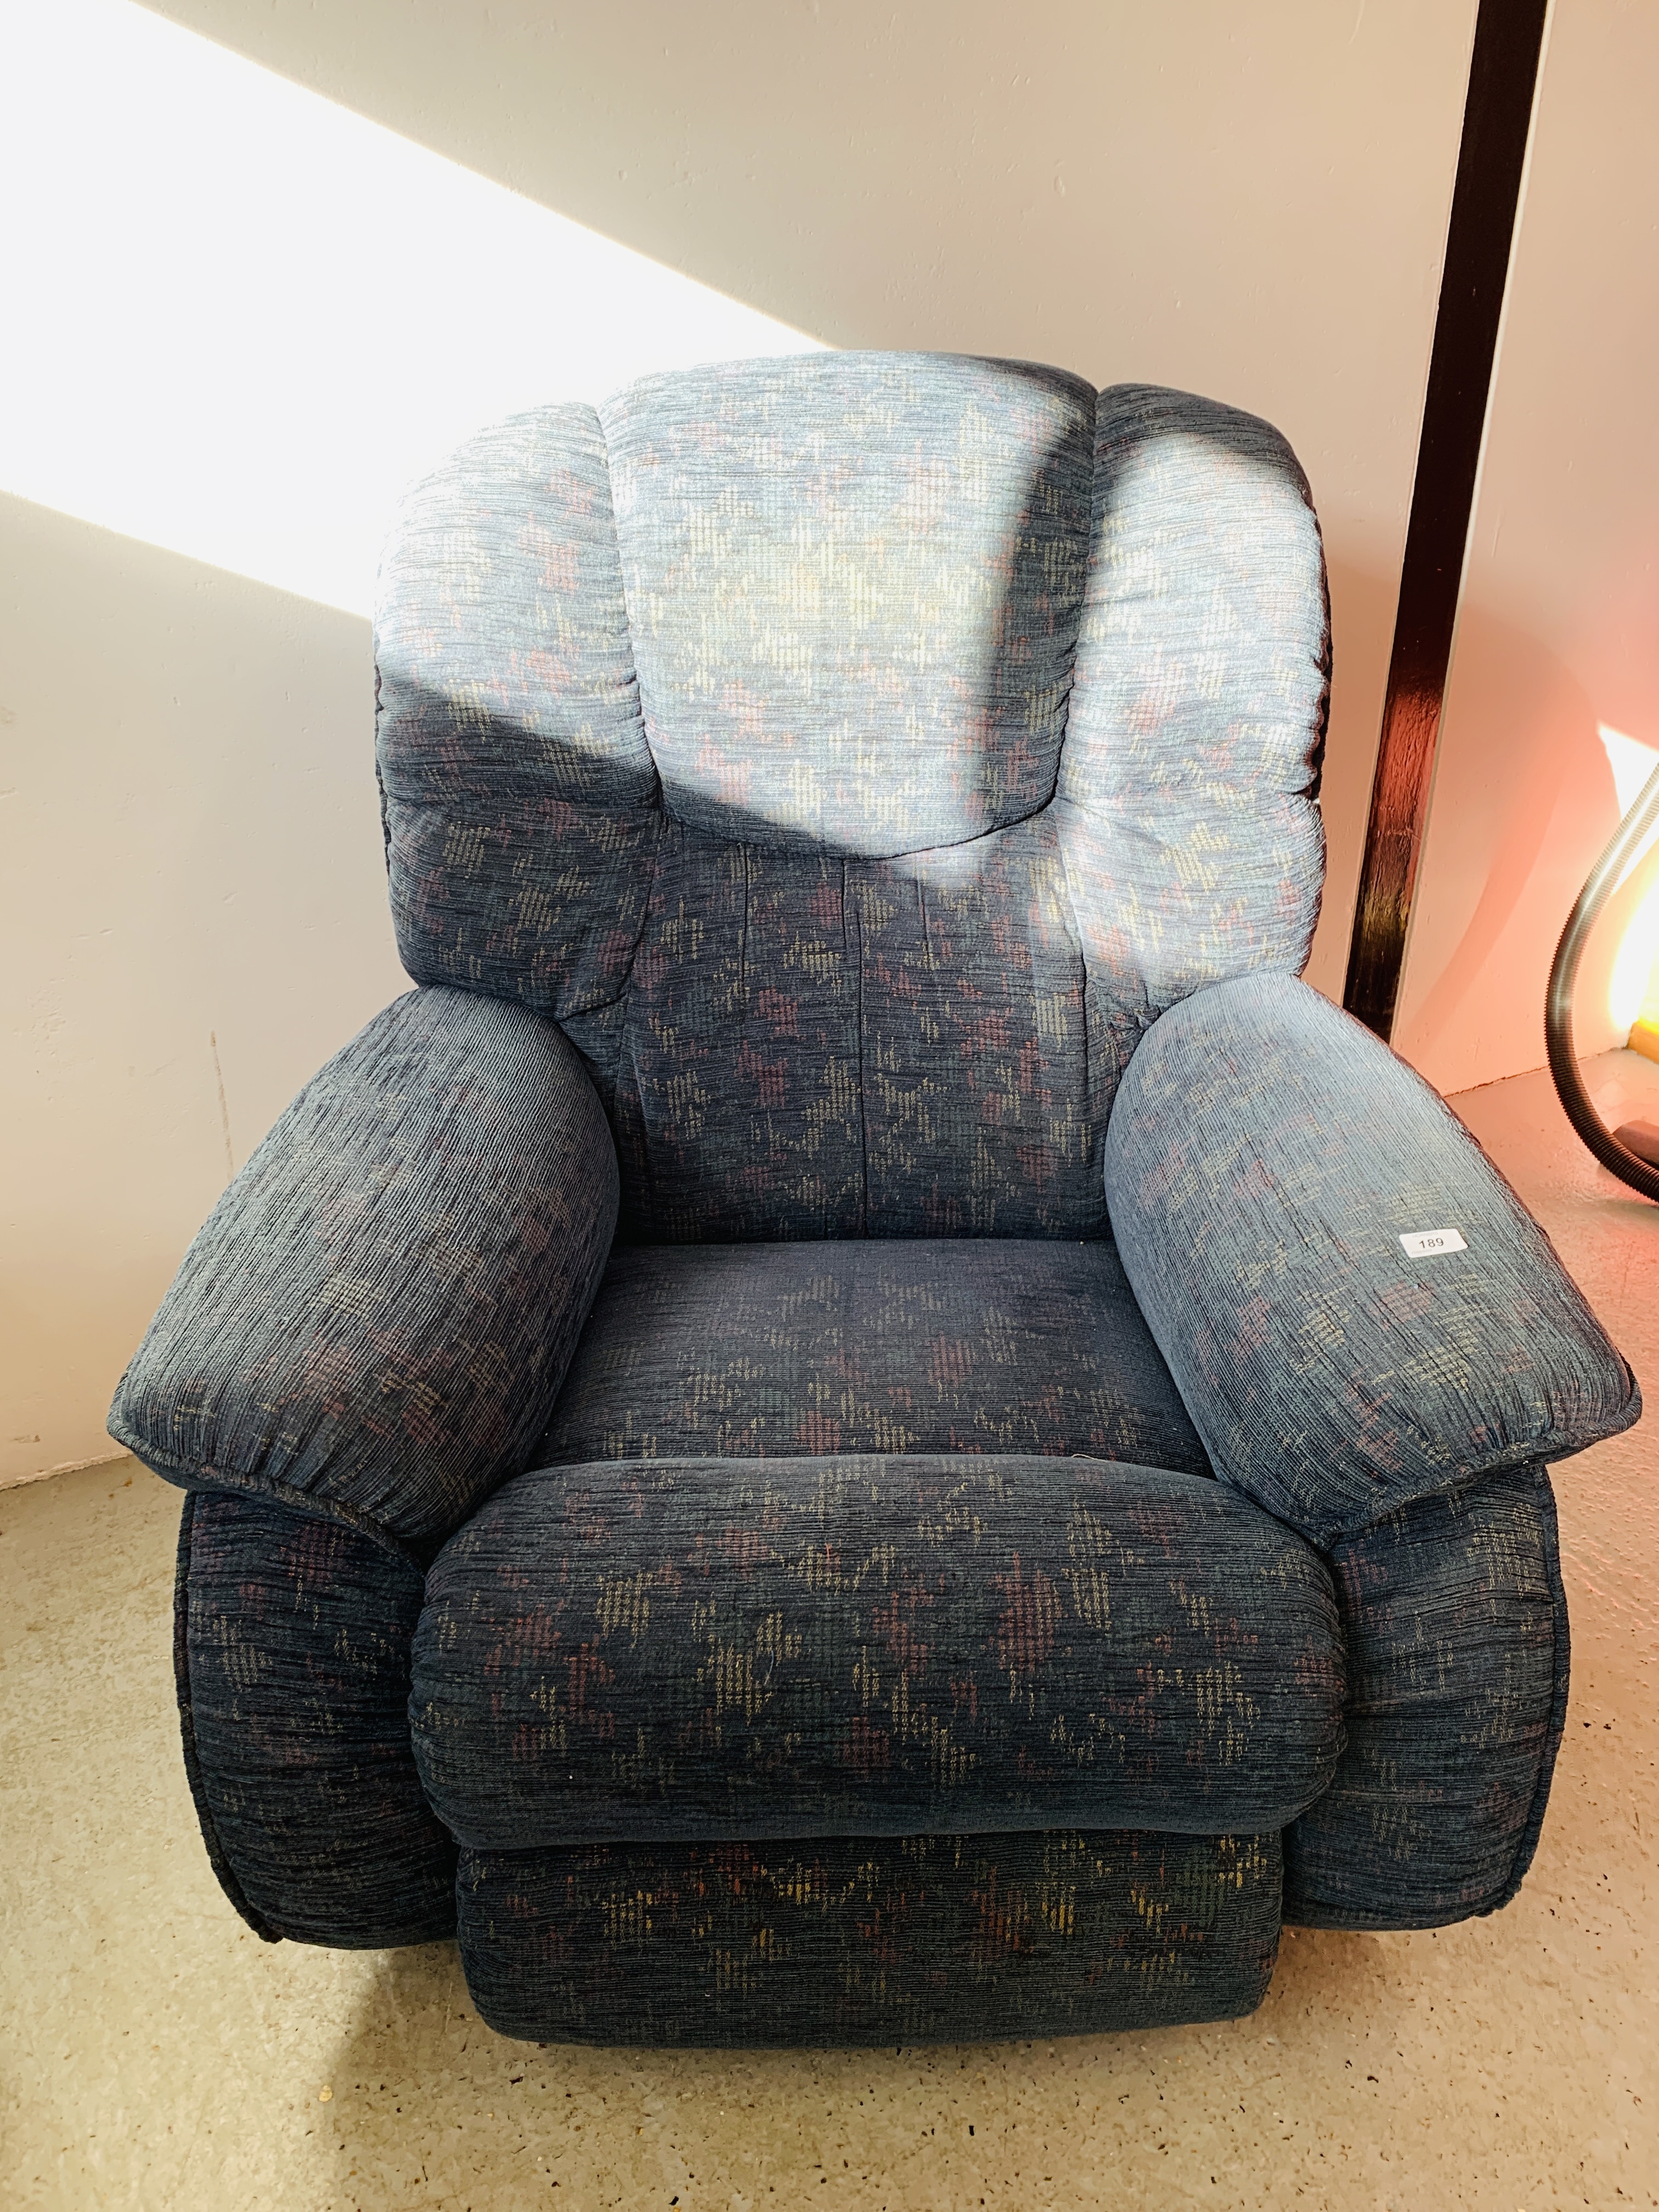 A PAIR OF LA-Z-BOY BLUE UPHOLSTERED SWIVEL RECLINER EASY CHAIRS - Image 11 of 13